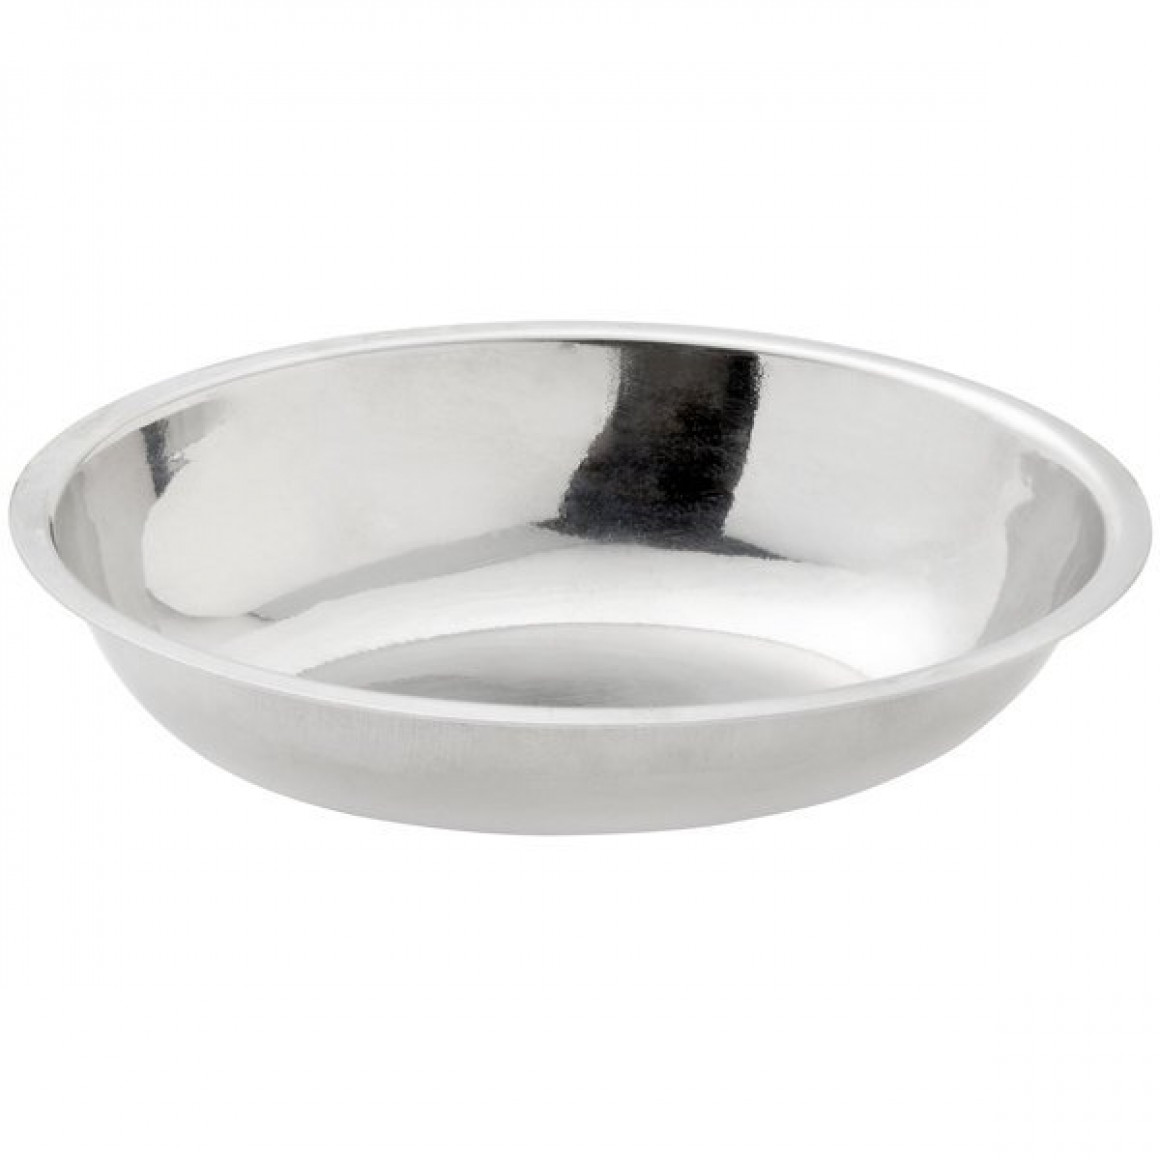 SAUCE CUP, STAINLESS STEEL, OVAL, 2.5 OZ.